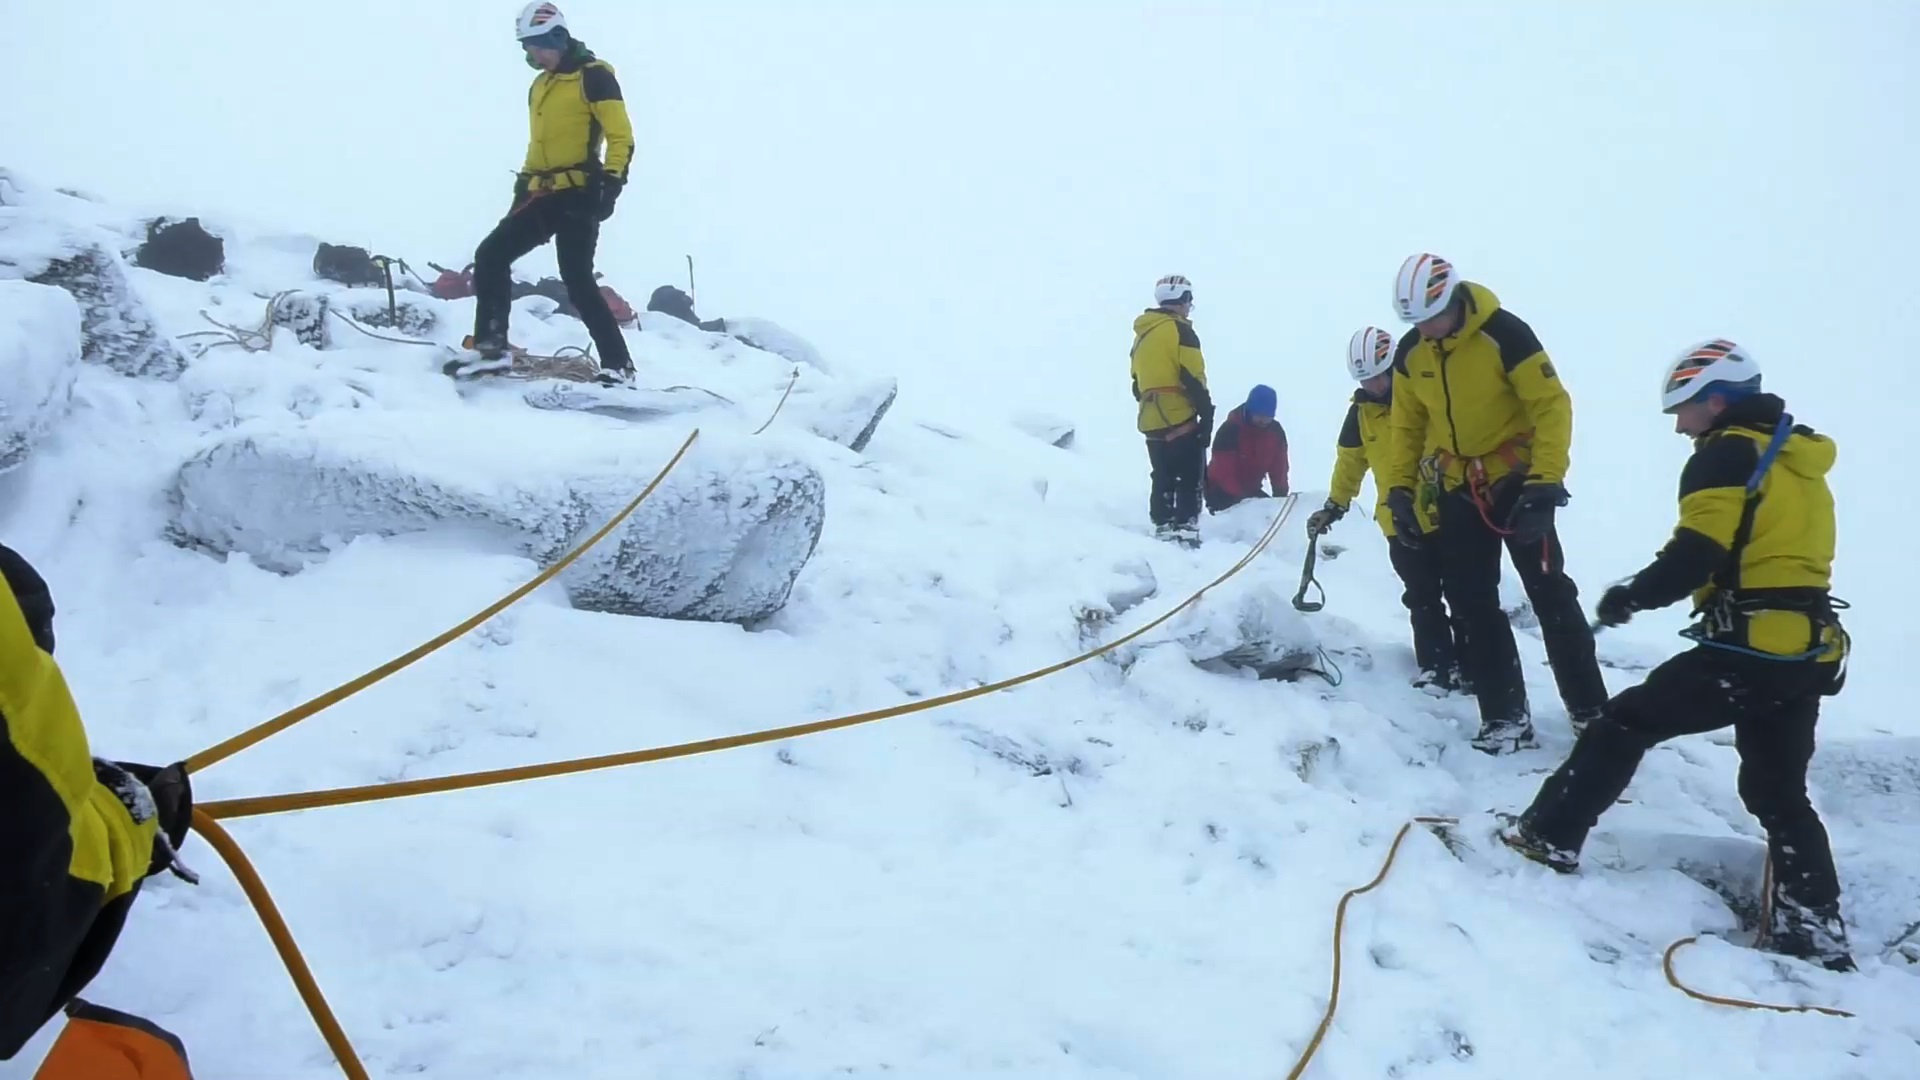 Cairngorm Mountain Rescue Team feature on the Adventure Show about coping with covid